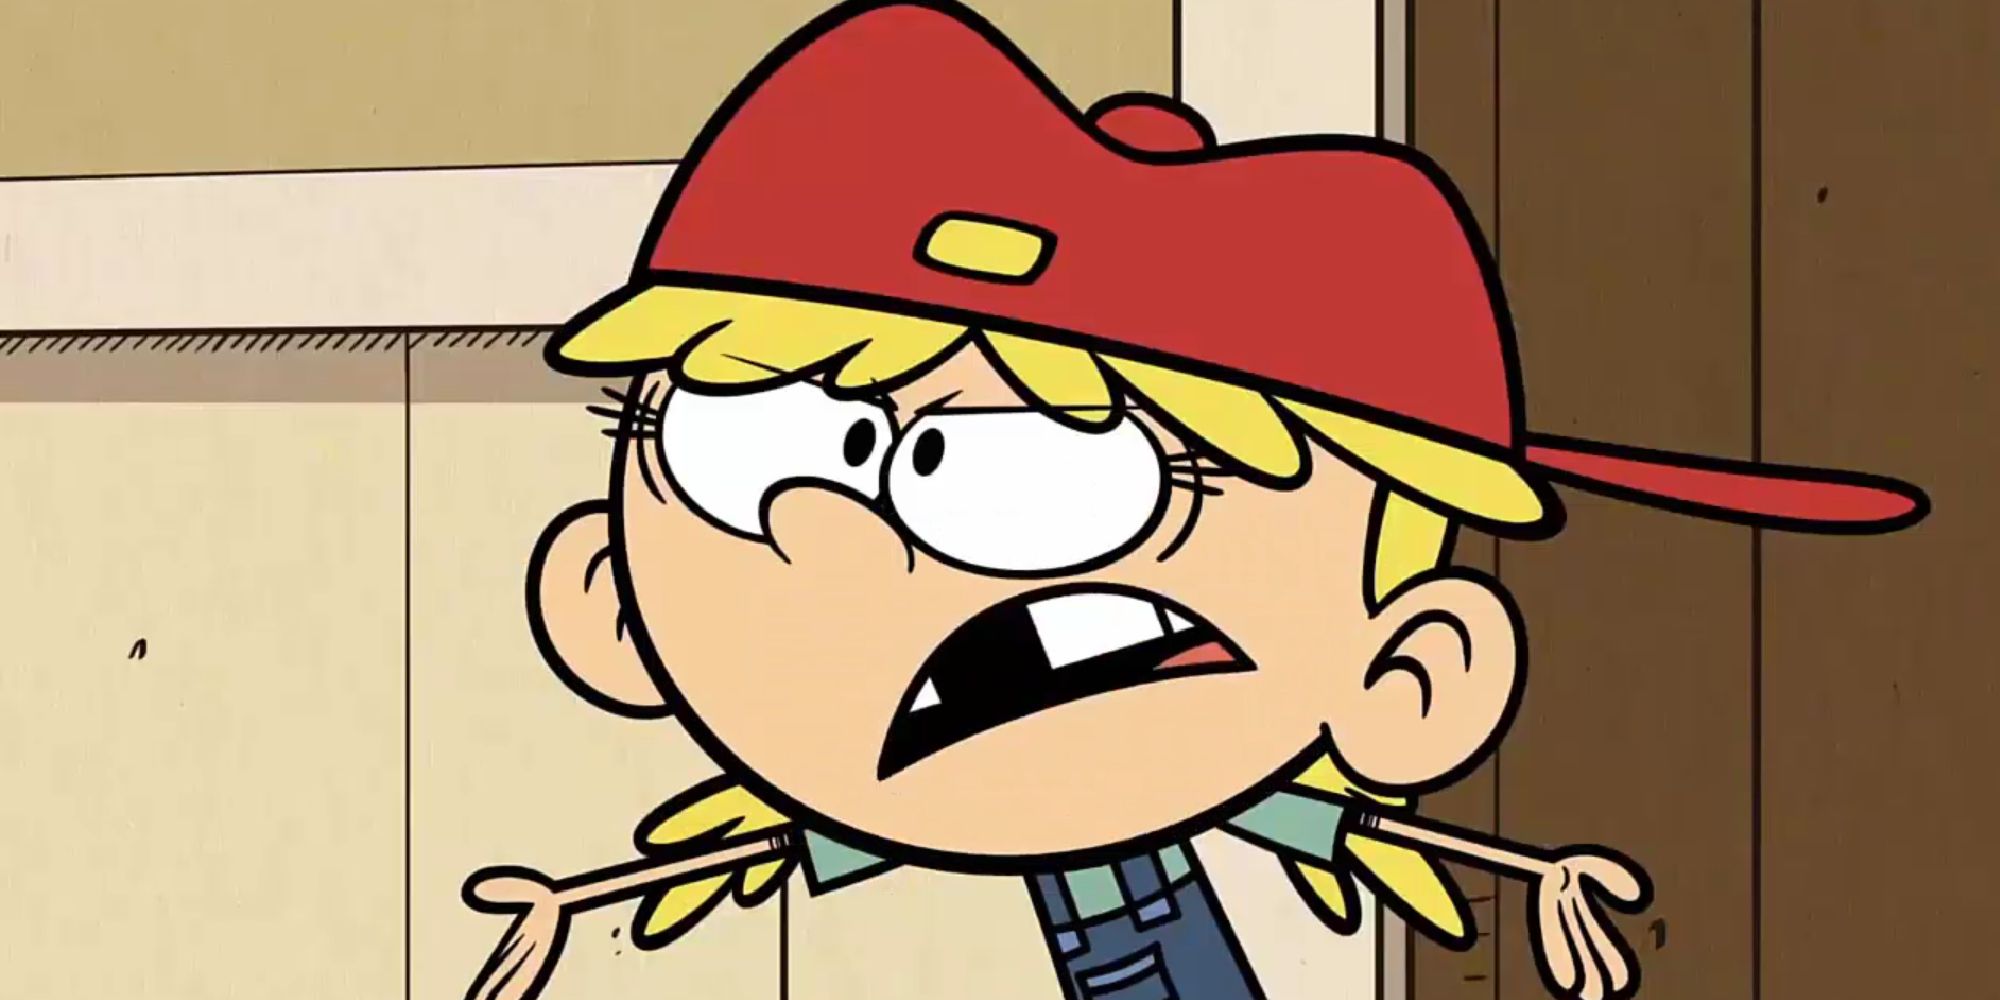 Lana Loud holding her arms out in exasperation